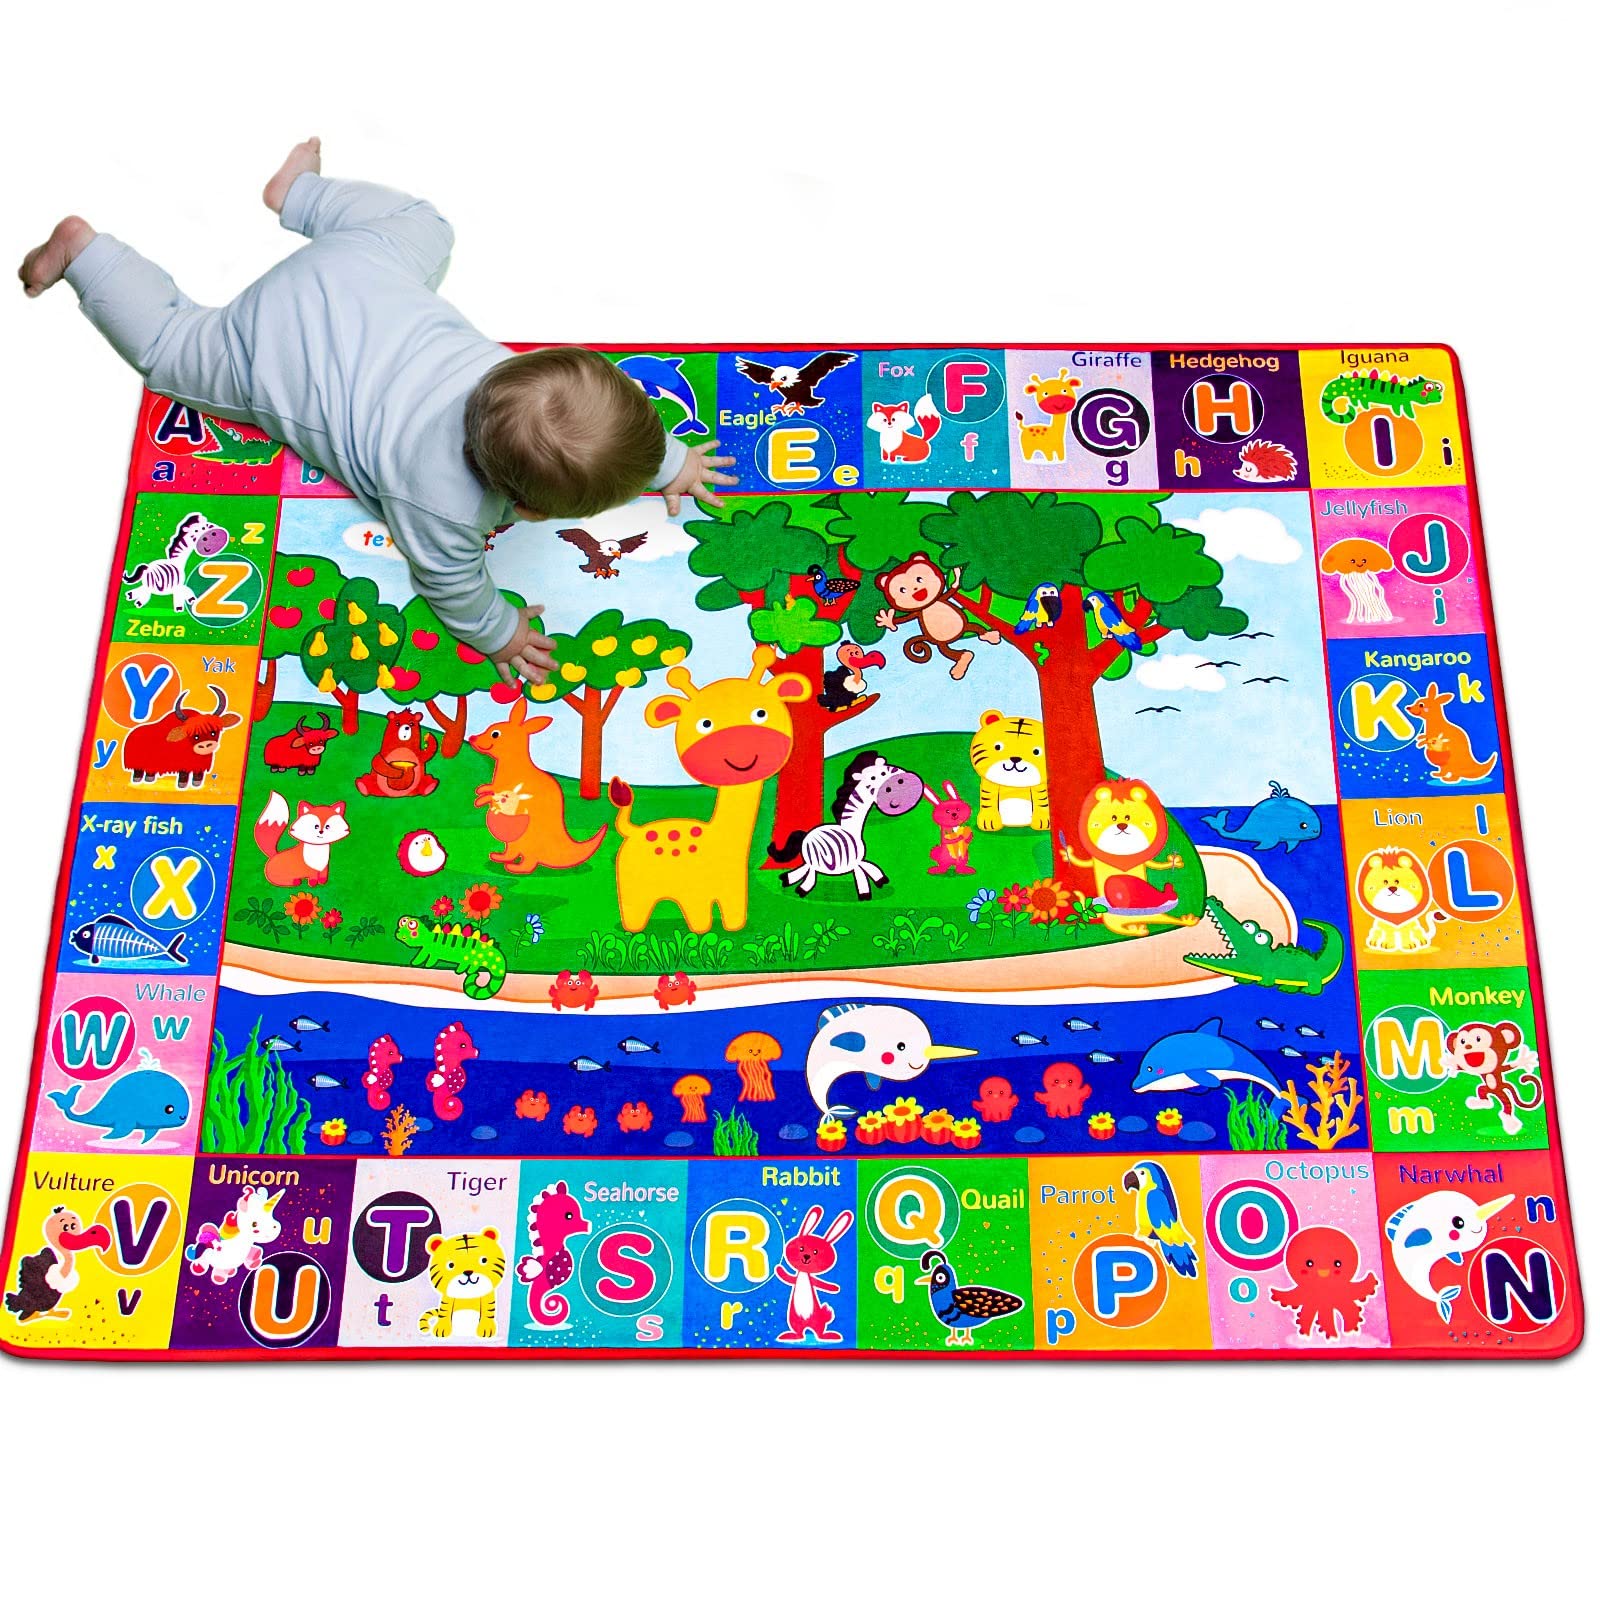 teytoy Baby Mats for Floor Cotton Playmat Baby Play Mat for Toddlers Large Super Soft Thick (0.6cm), Foldable Non-Slip Baby Carpet Kids Rug for Learning Animals ABC